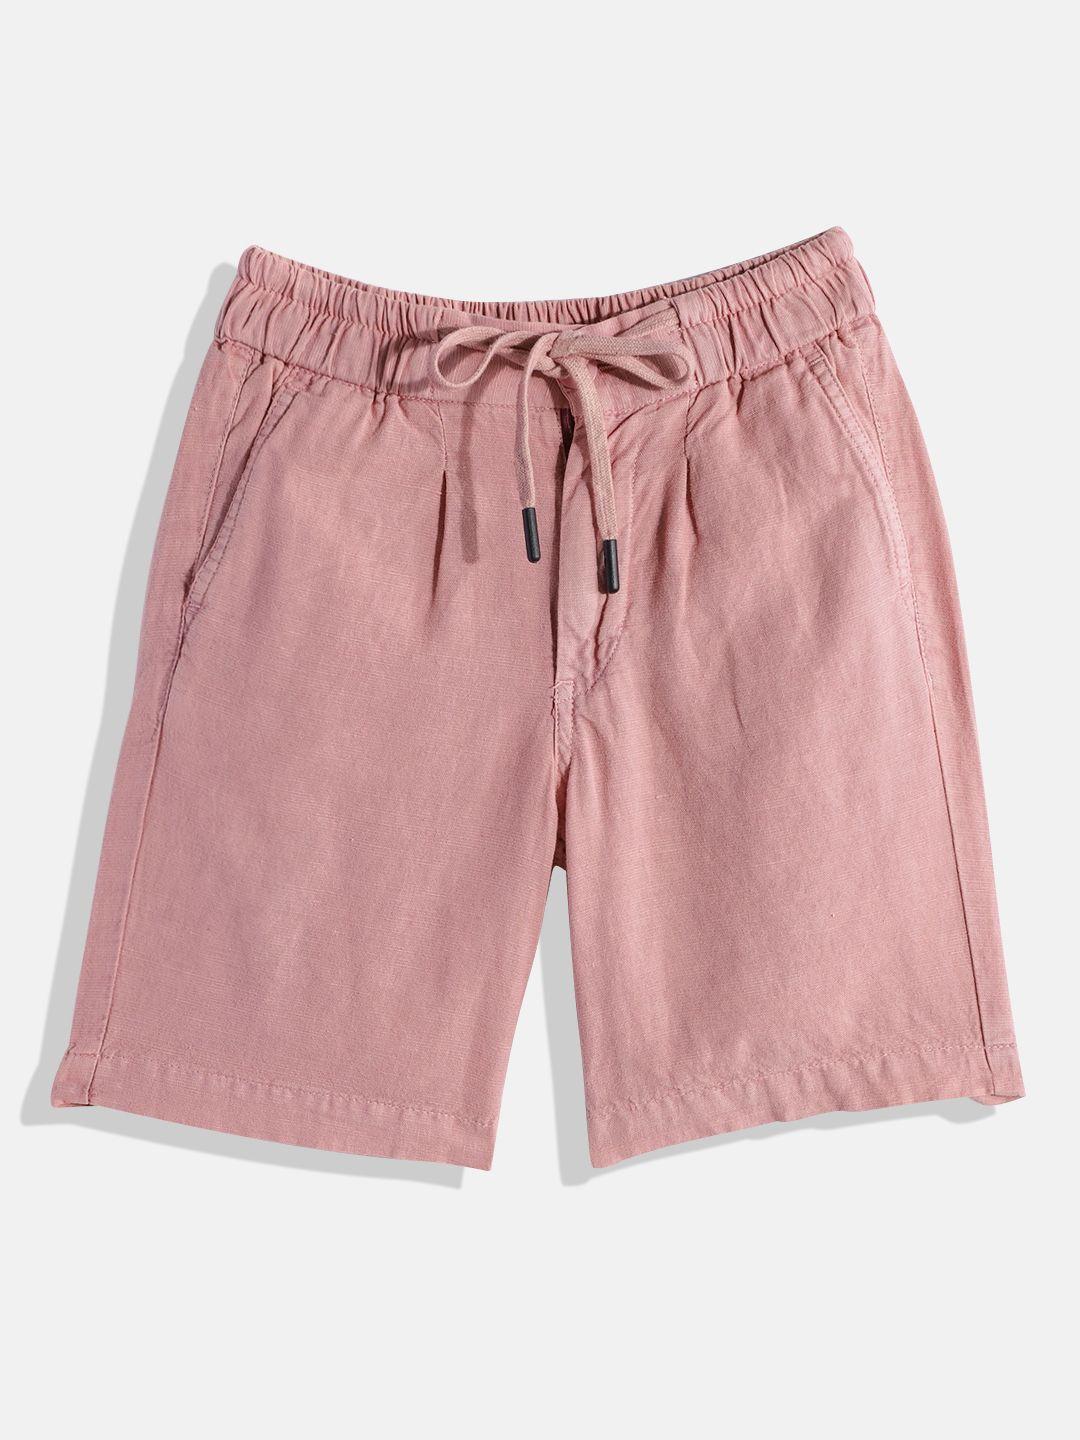 m&h juniors boys pink solid shorts